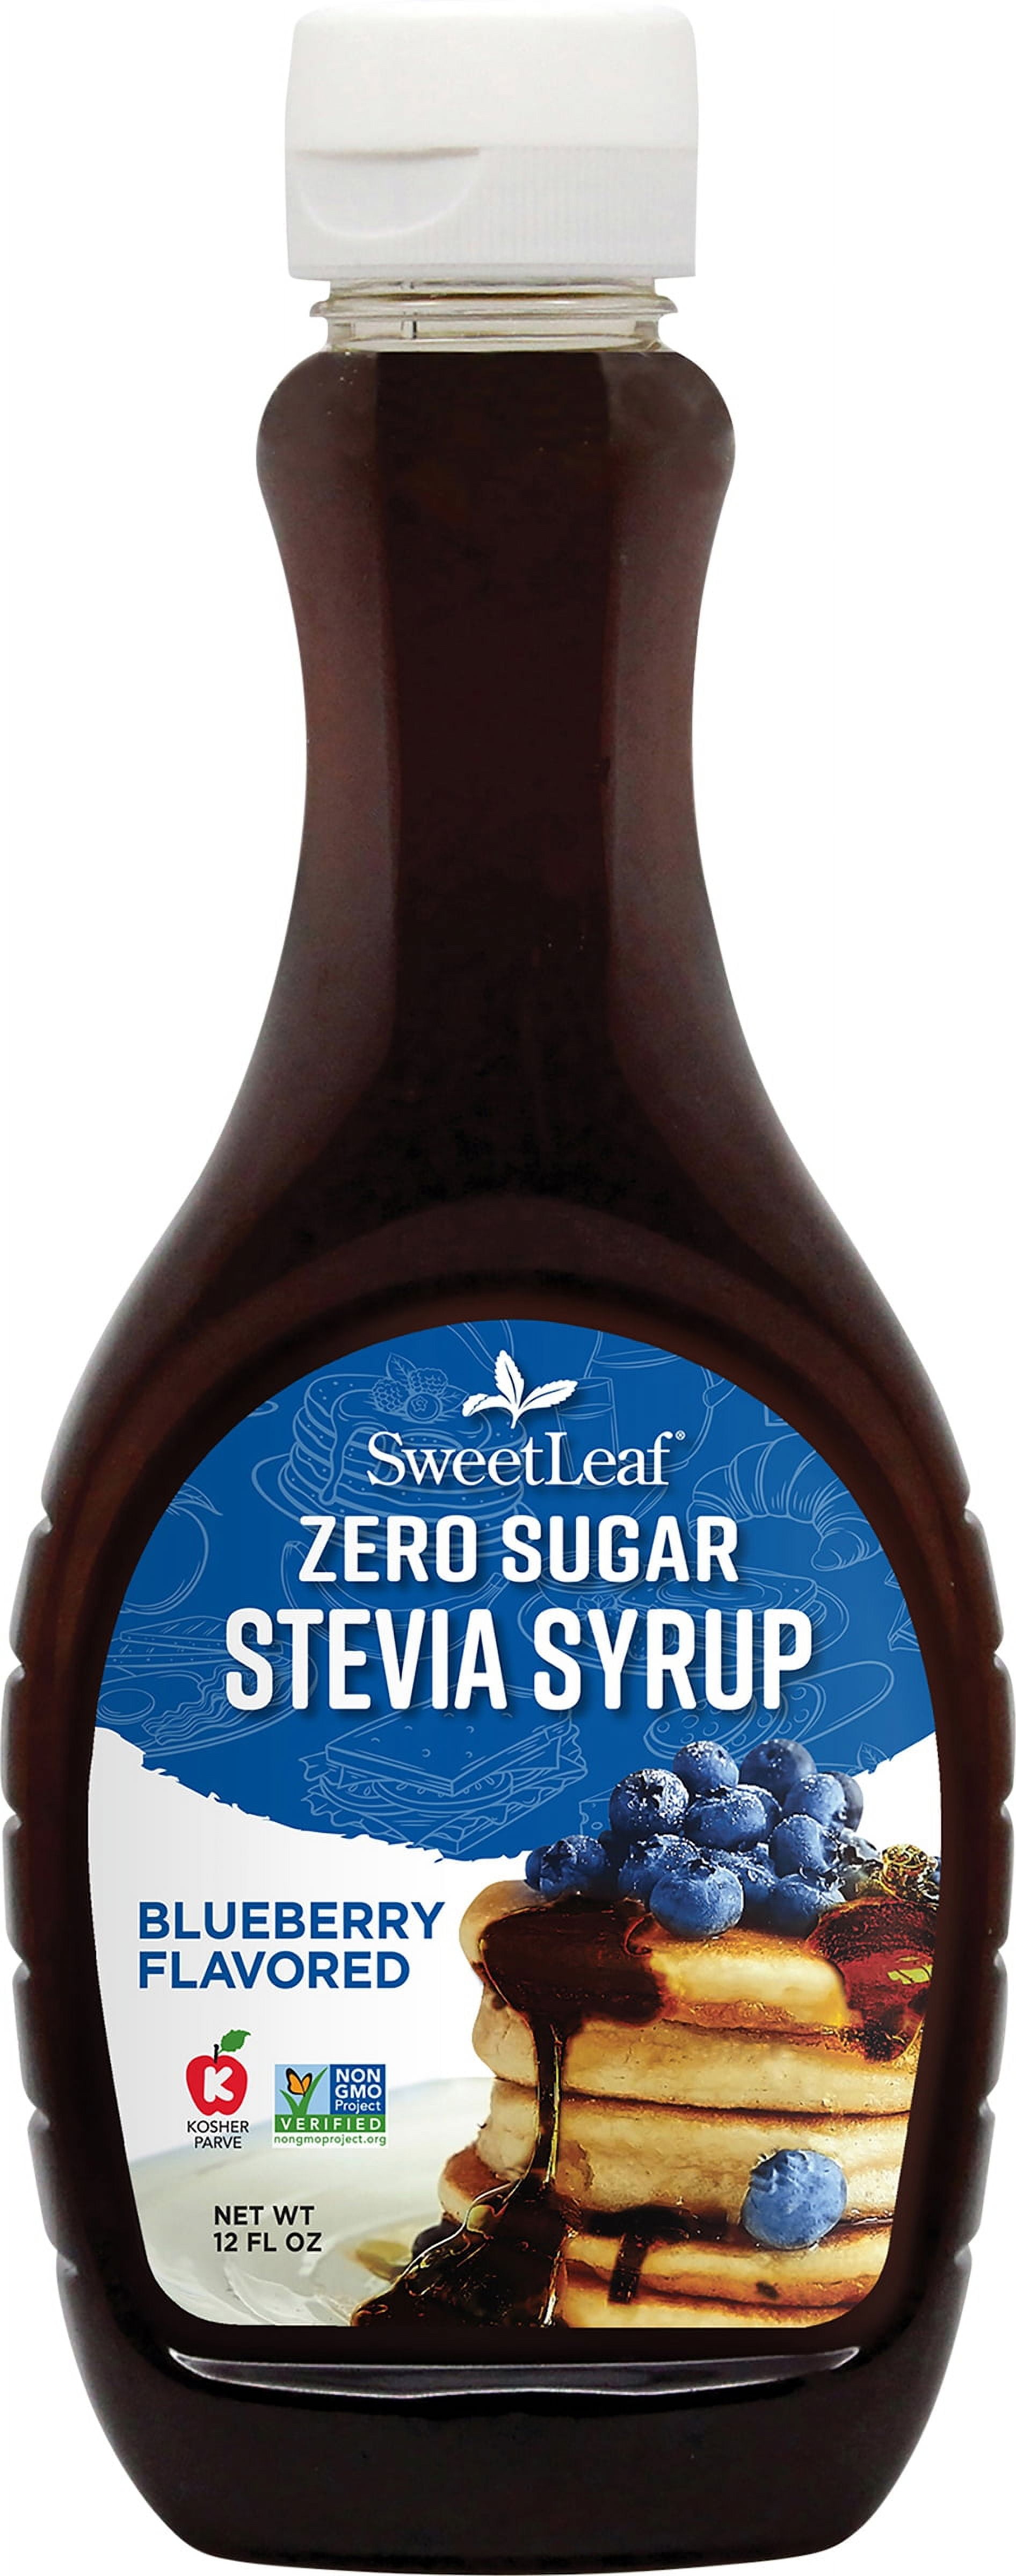 Sweeteners Collection, FlavDrops & Sugar-Free Syrups